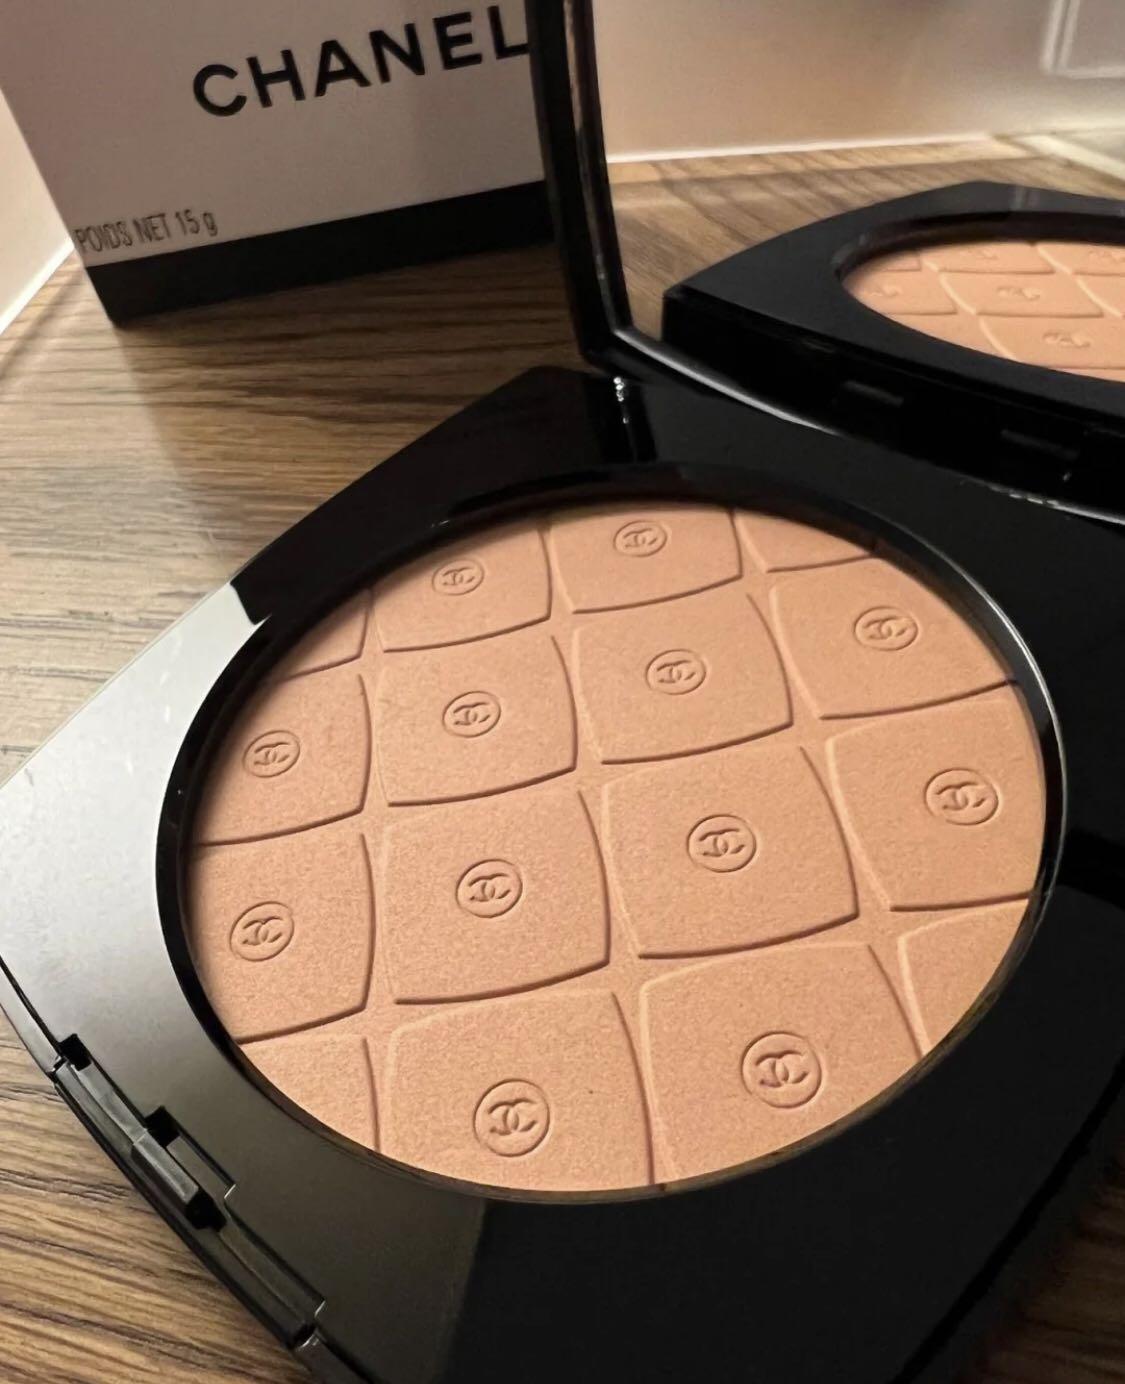 CHANEL · Les Beiges Oversize Healthy Glow Tender Pink Highlighting